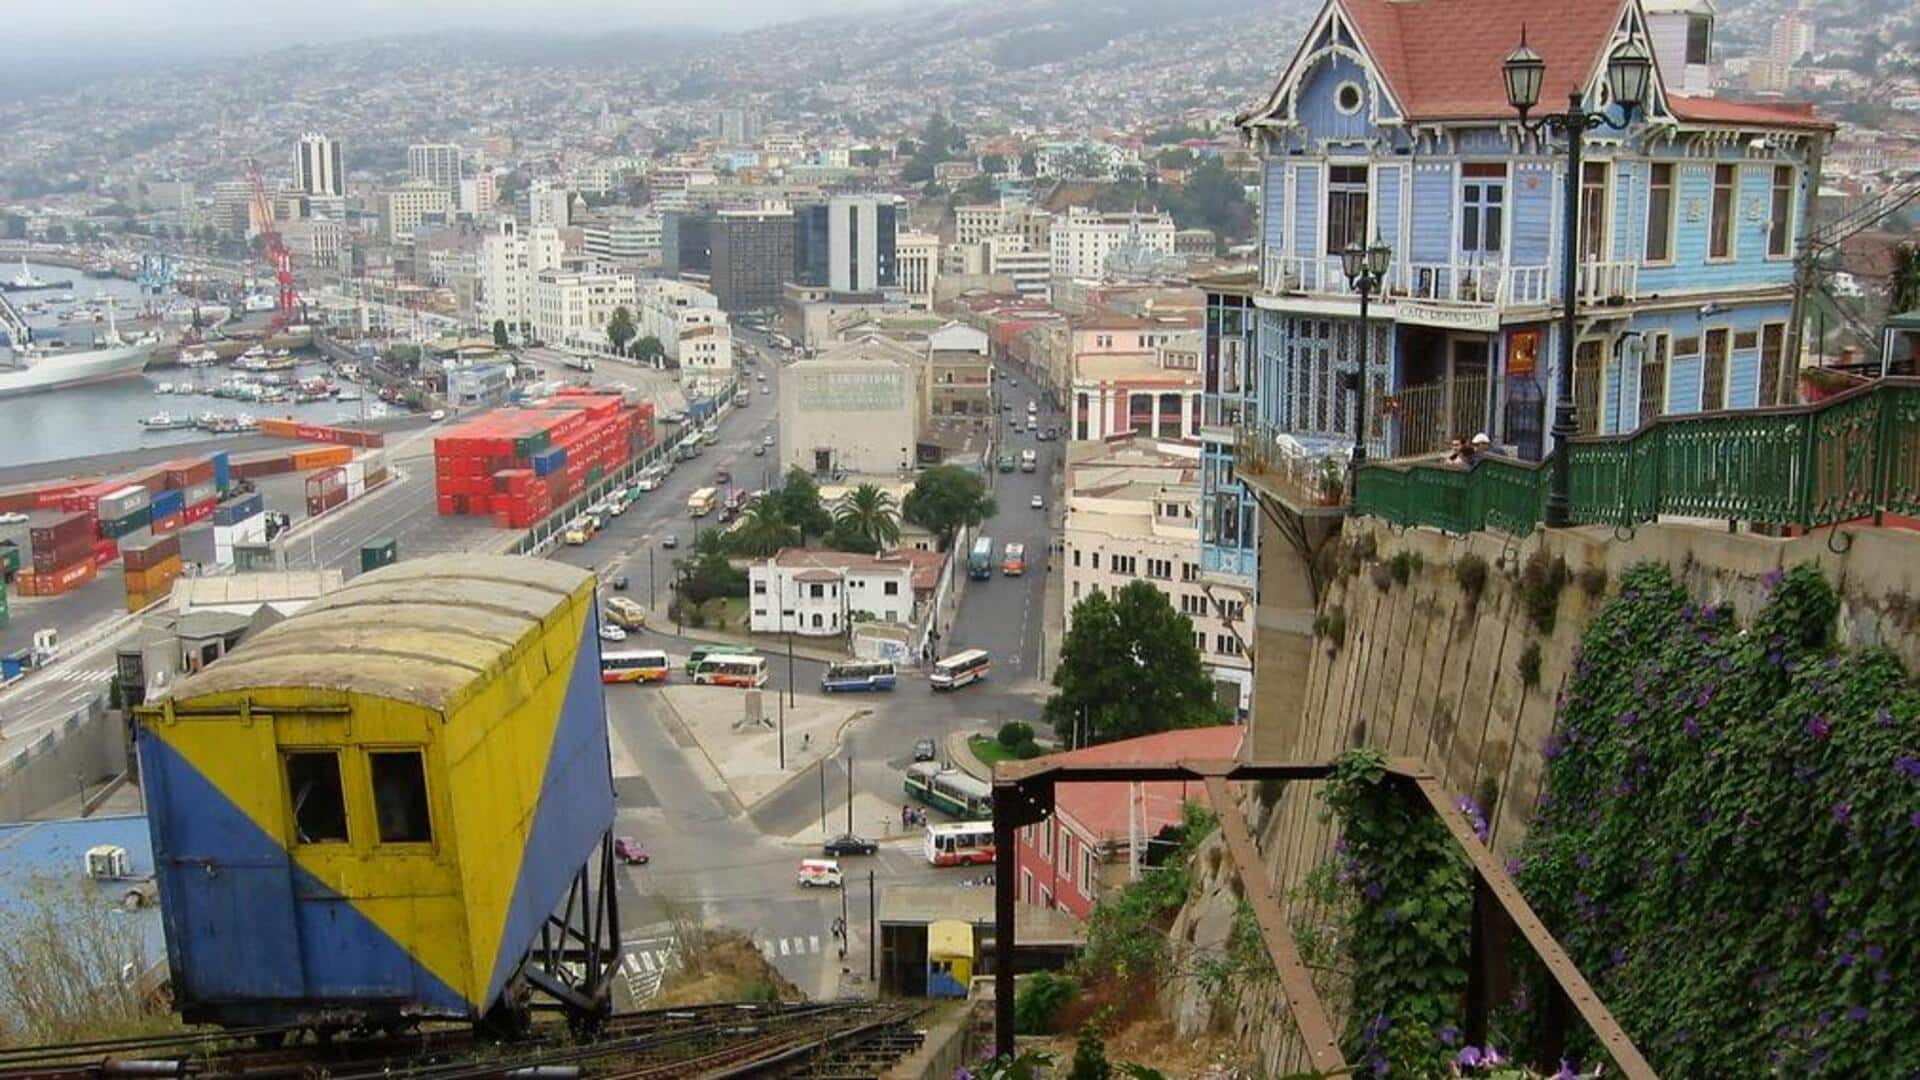 Valparaiso on the Chilean coast is vibrant and scenic